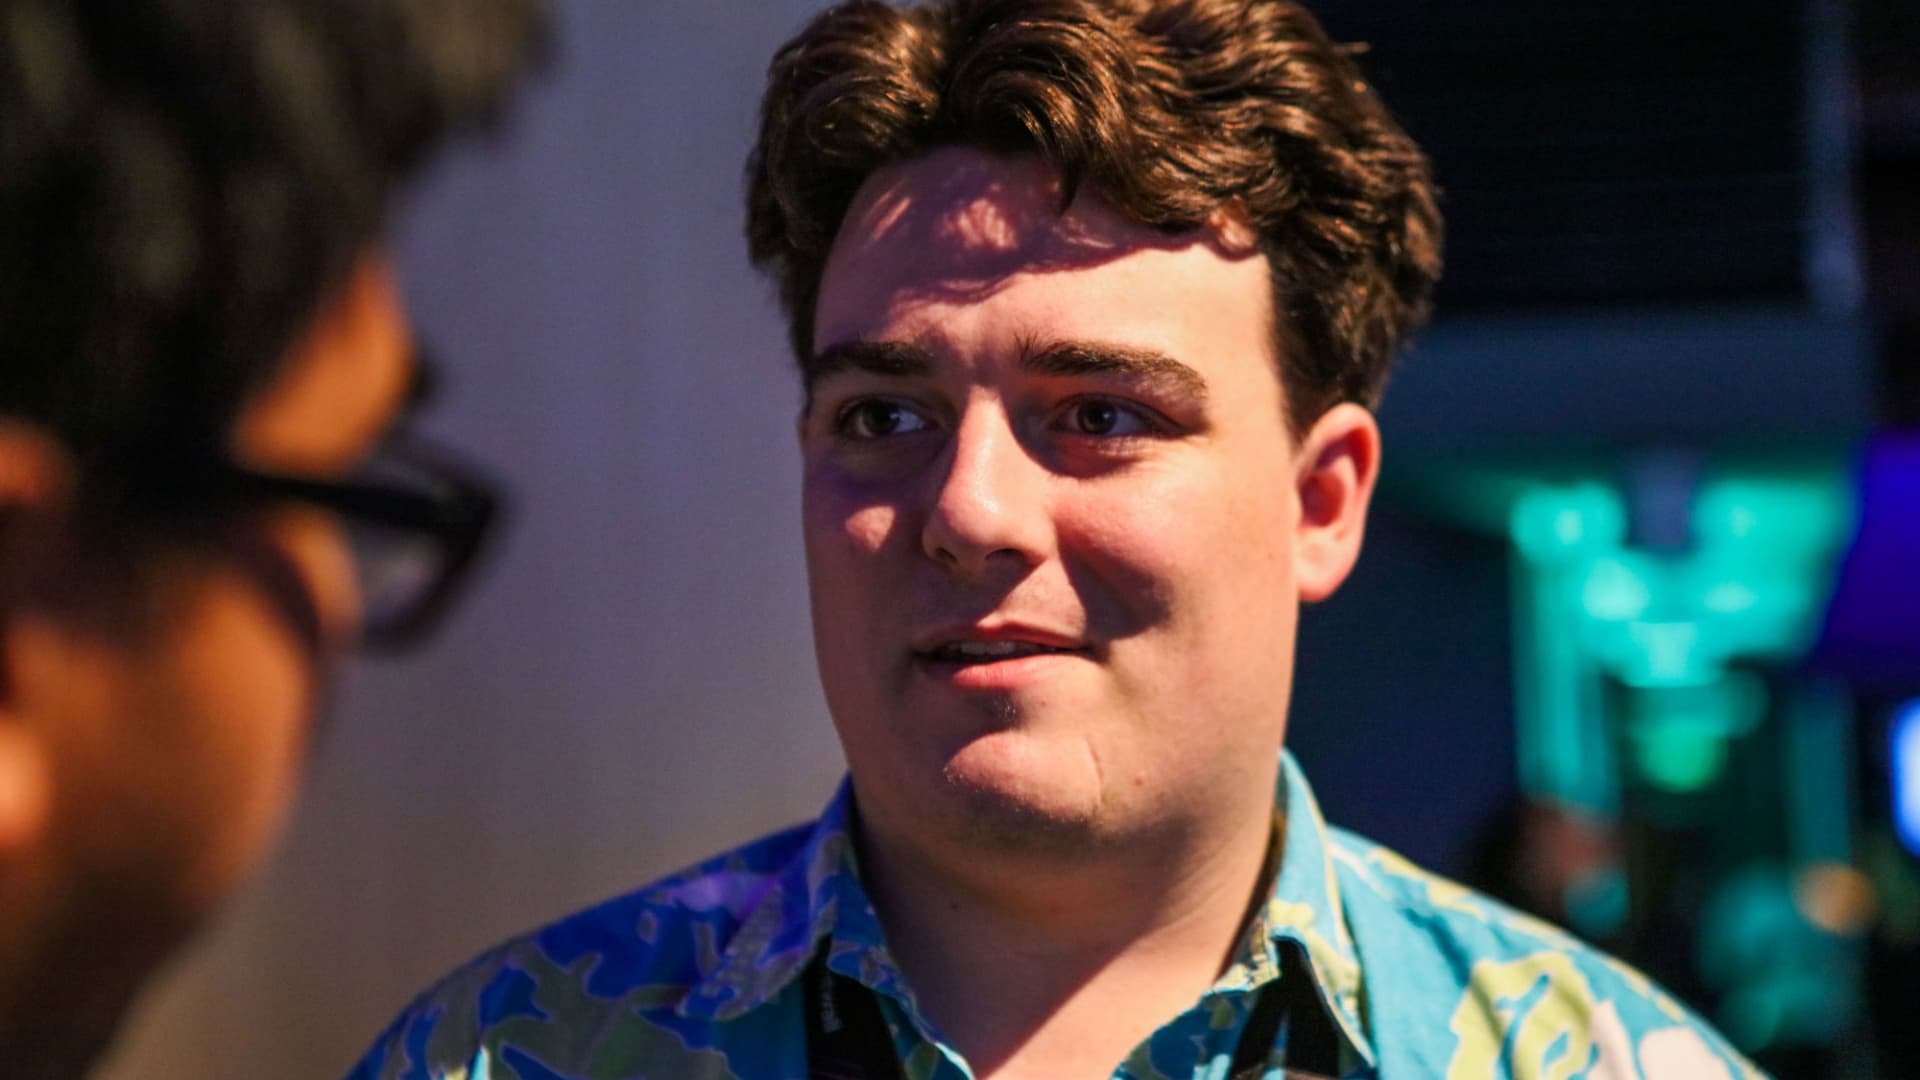 Oculus founder Palmer Luckey's defense start-up is now making attack drones